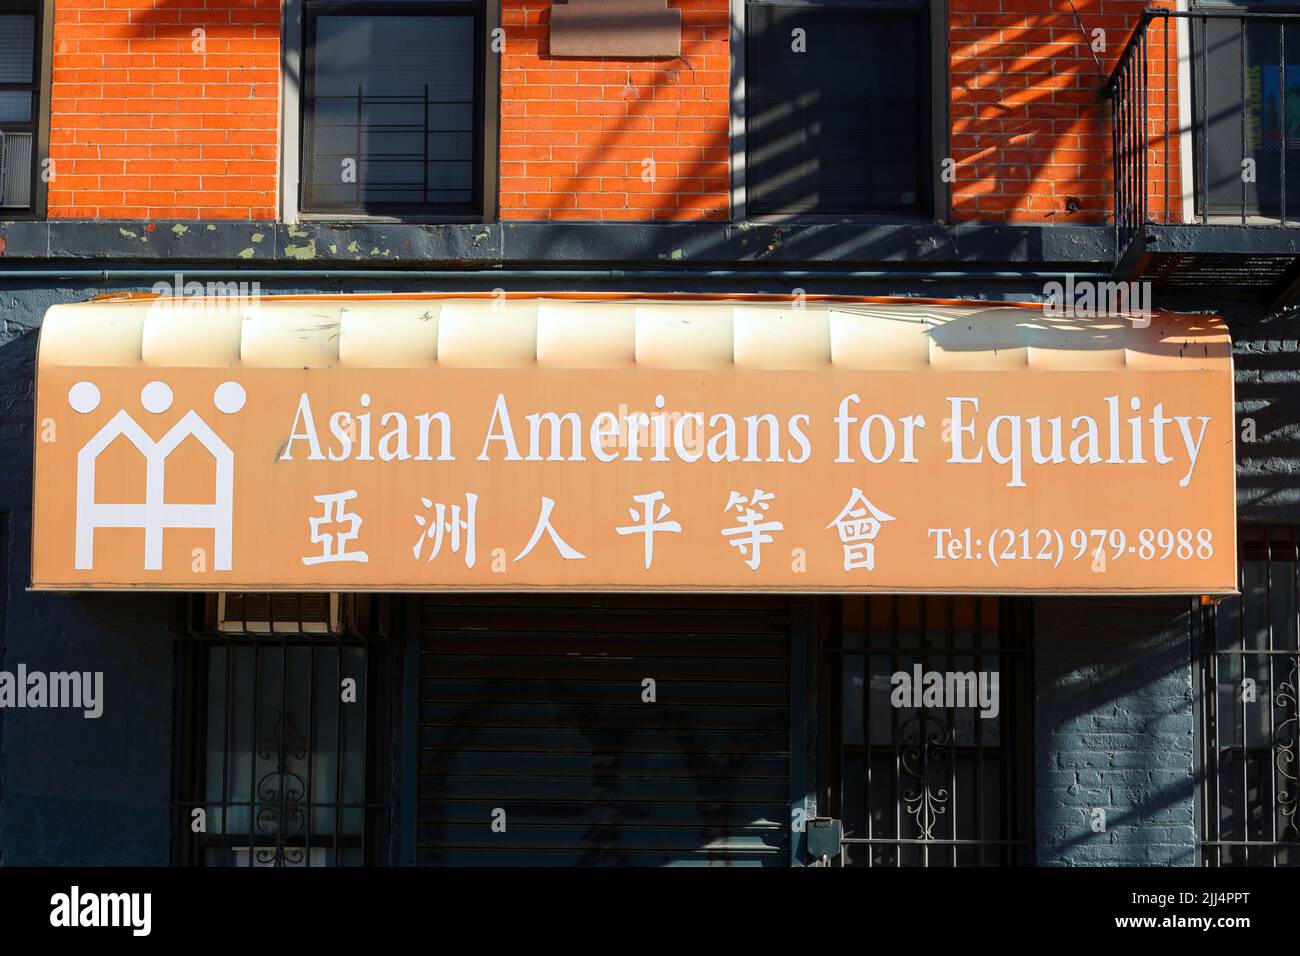 Asian Americans for Equality 亞洲人平等會. signage for an Asian American civil rights, social justice and community development organization. Stock Photo